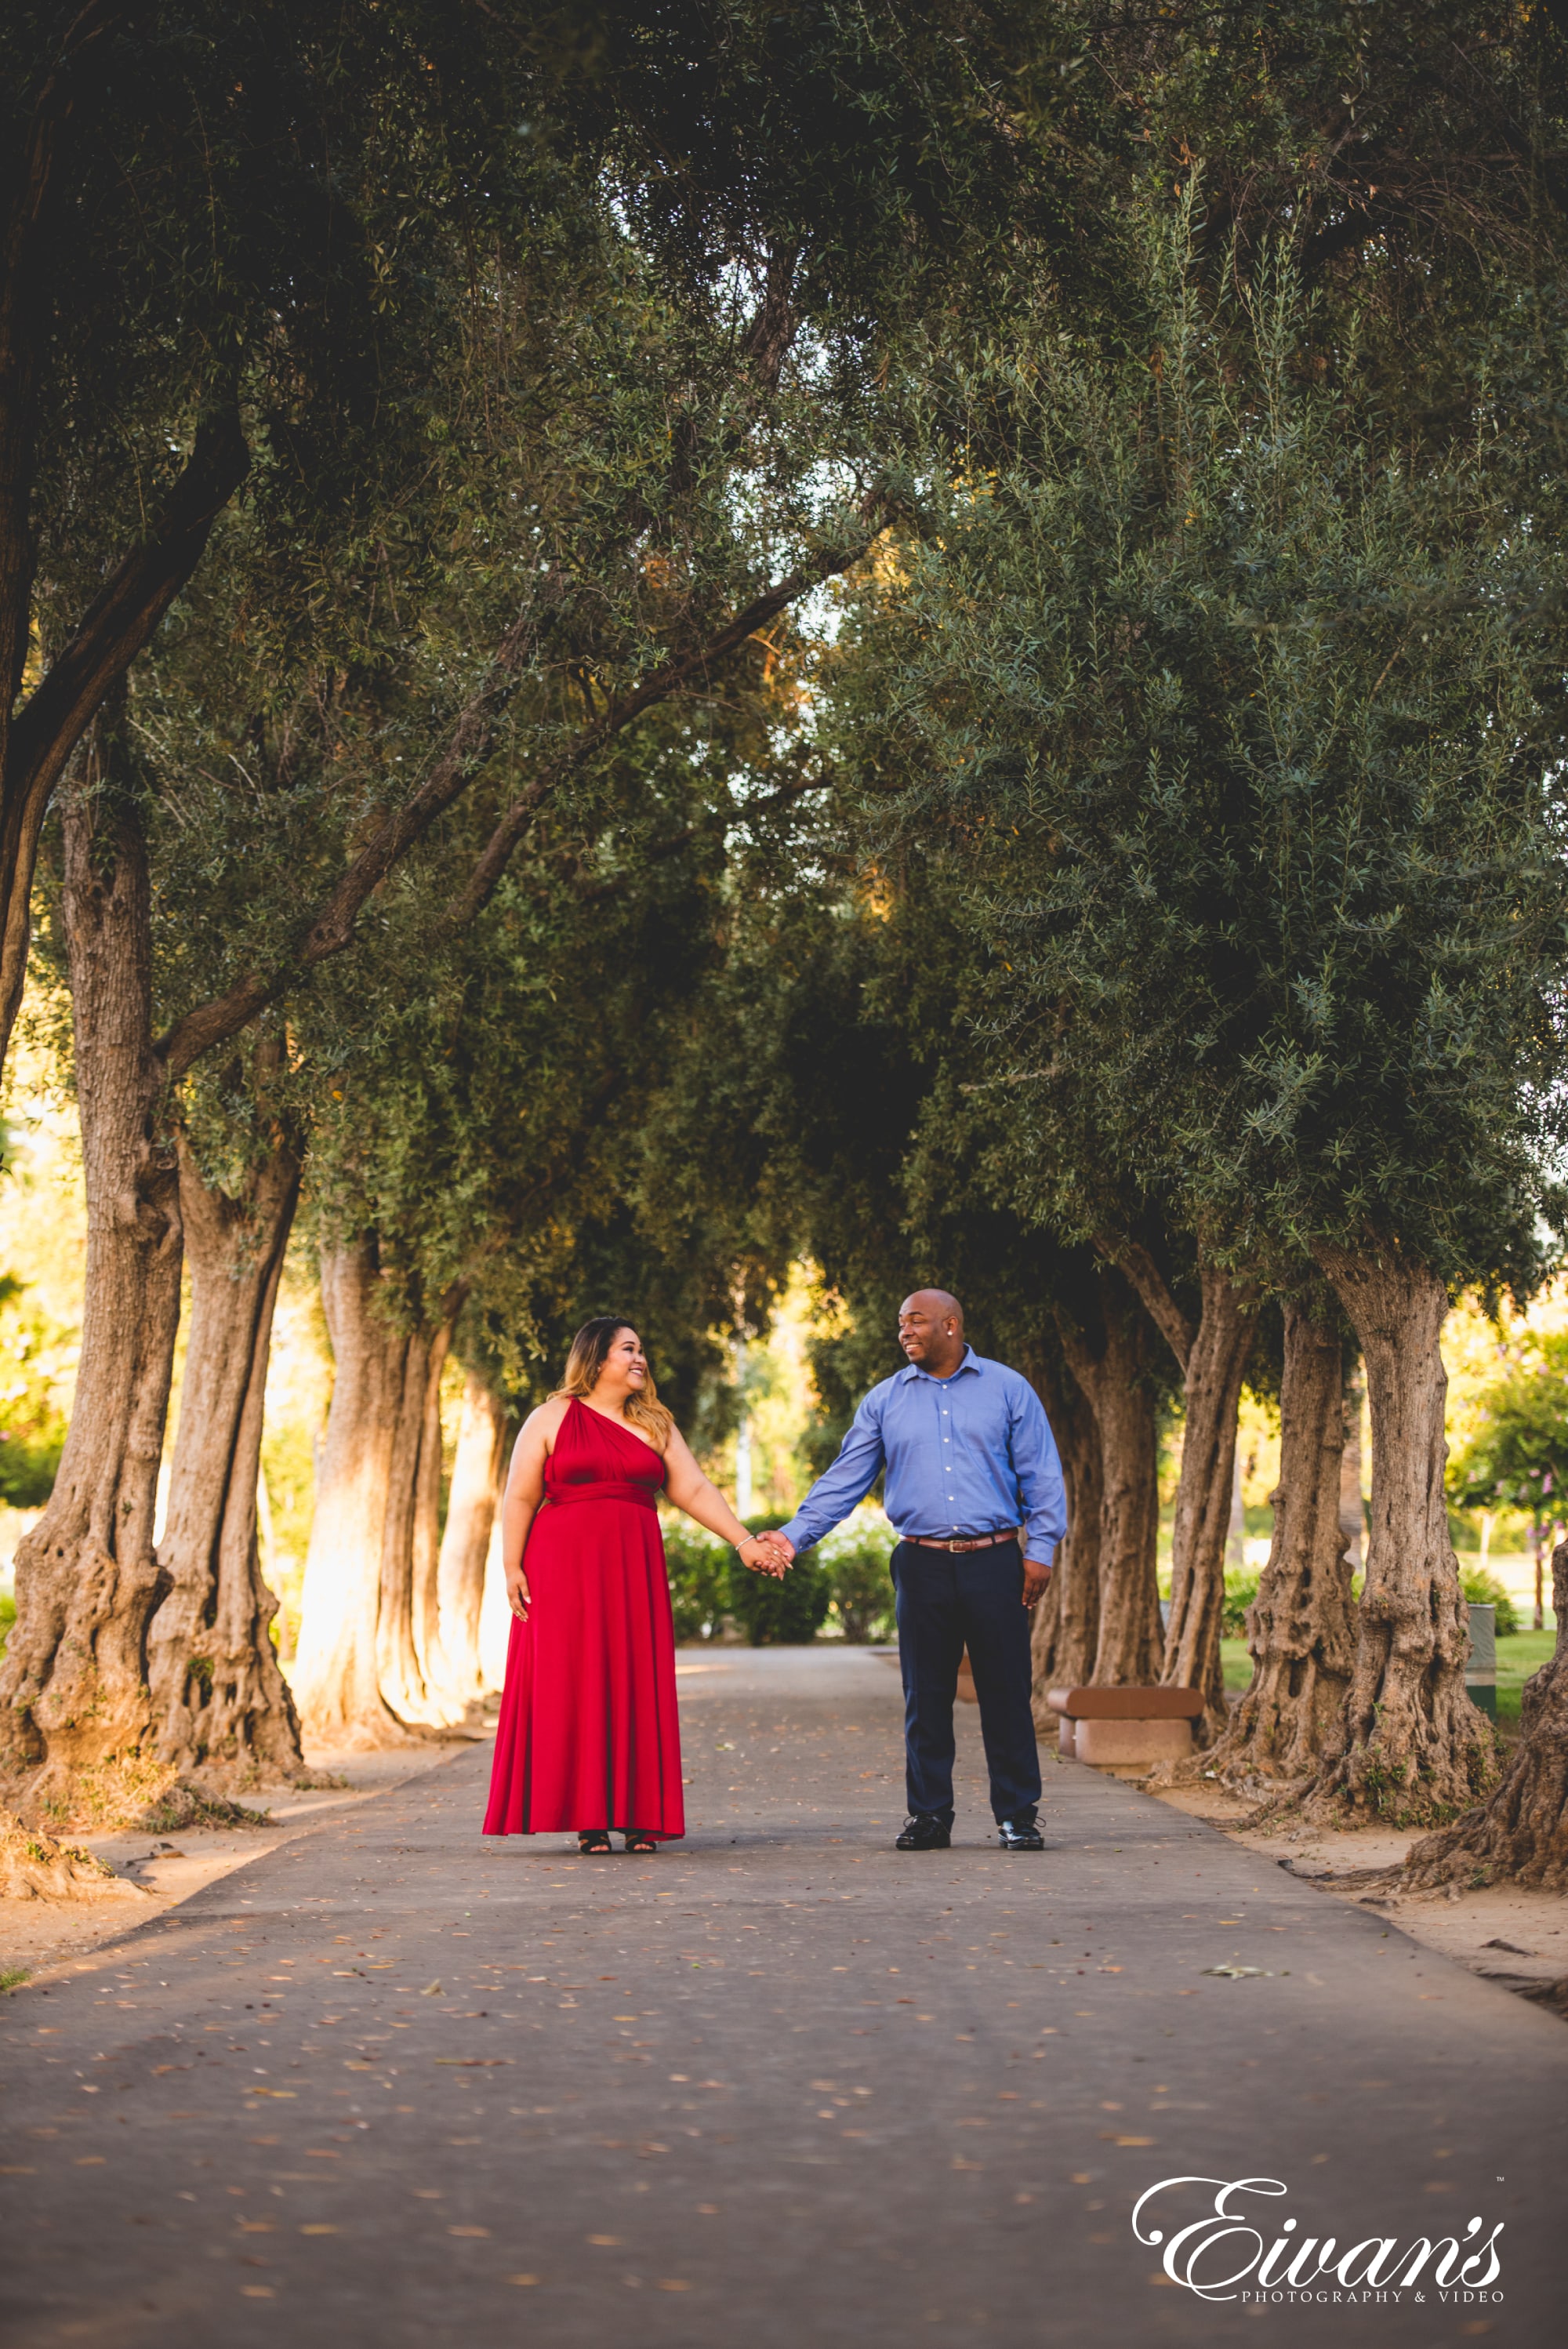 man and woman standing in front of green trees during daytime